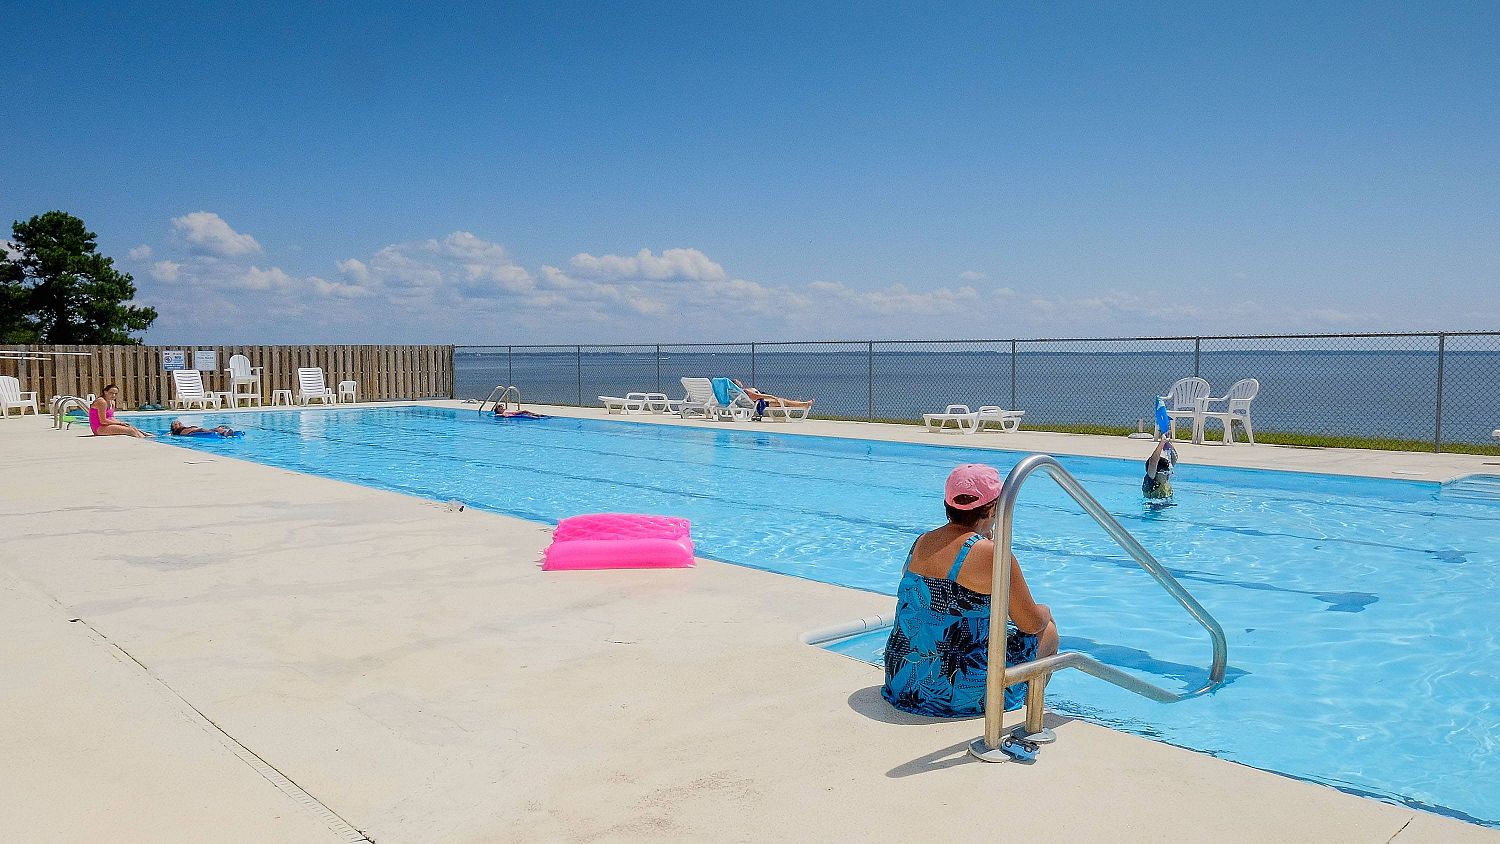 The swimming pool at the Links at Mulberry Hill with the Albemarle Sound view